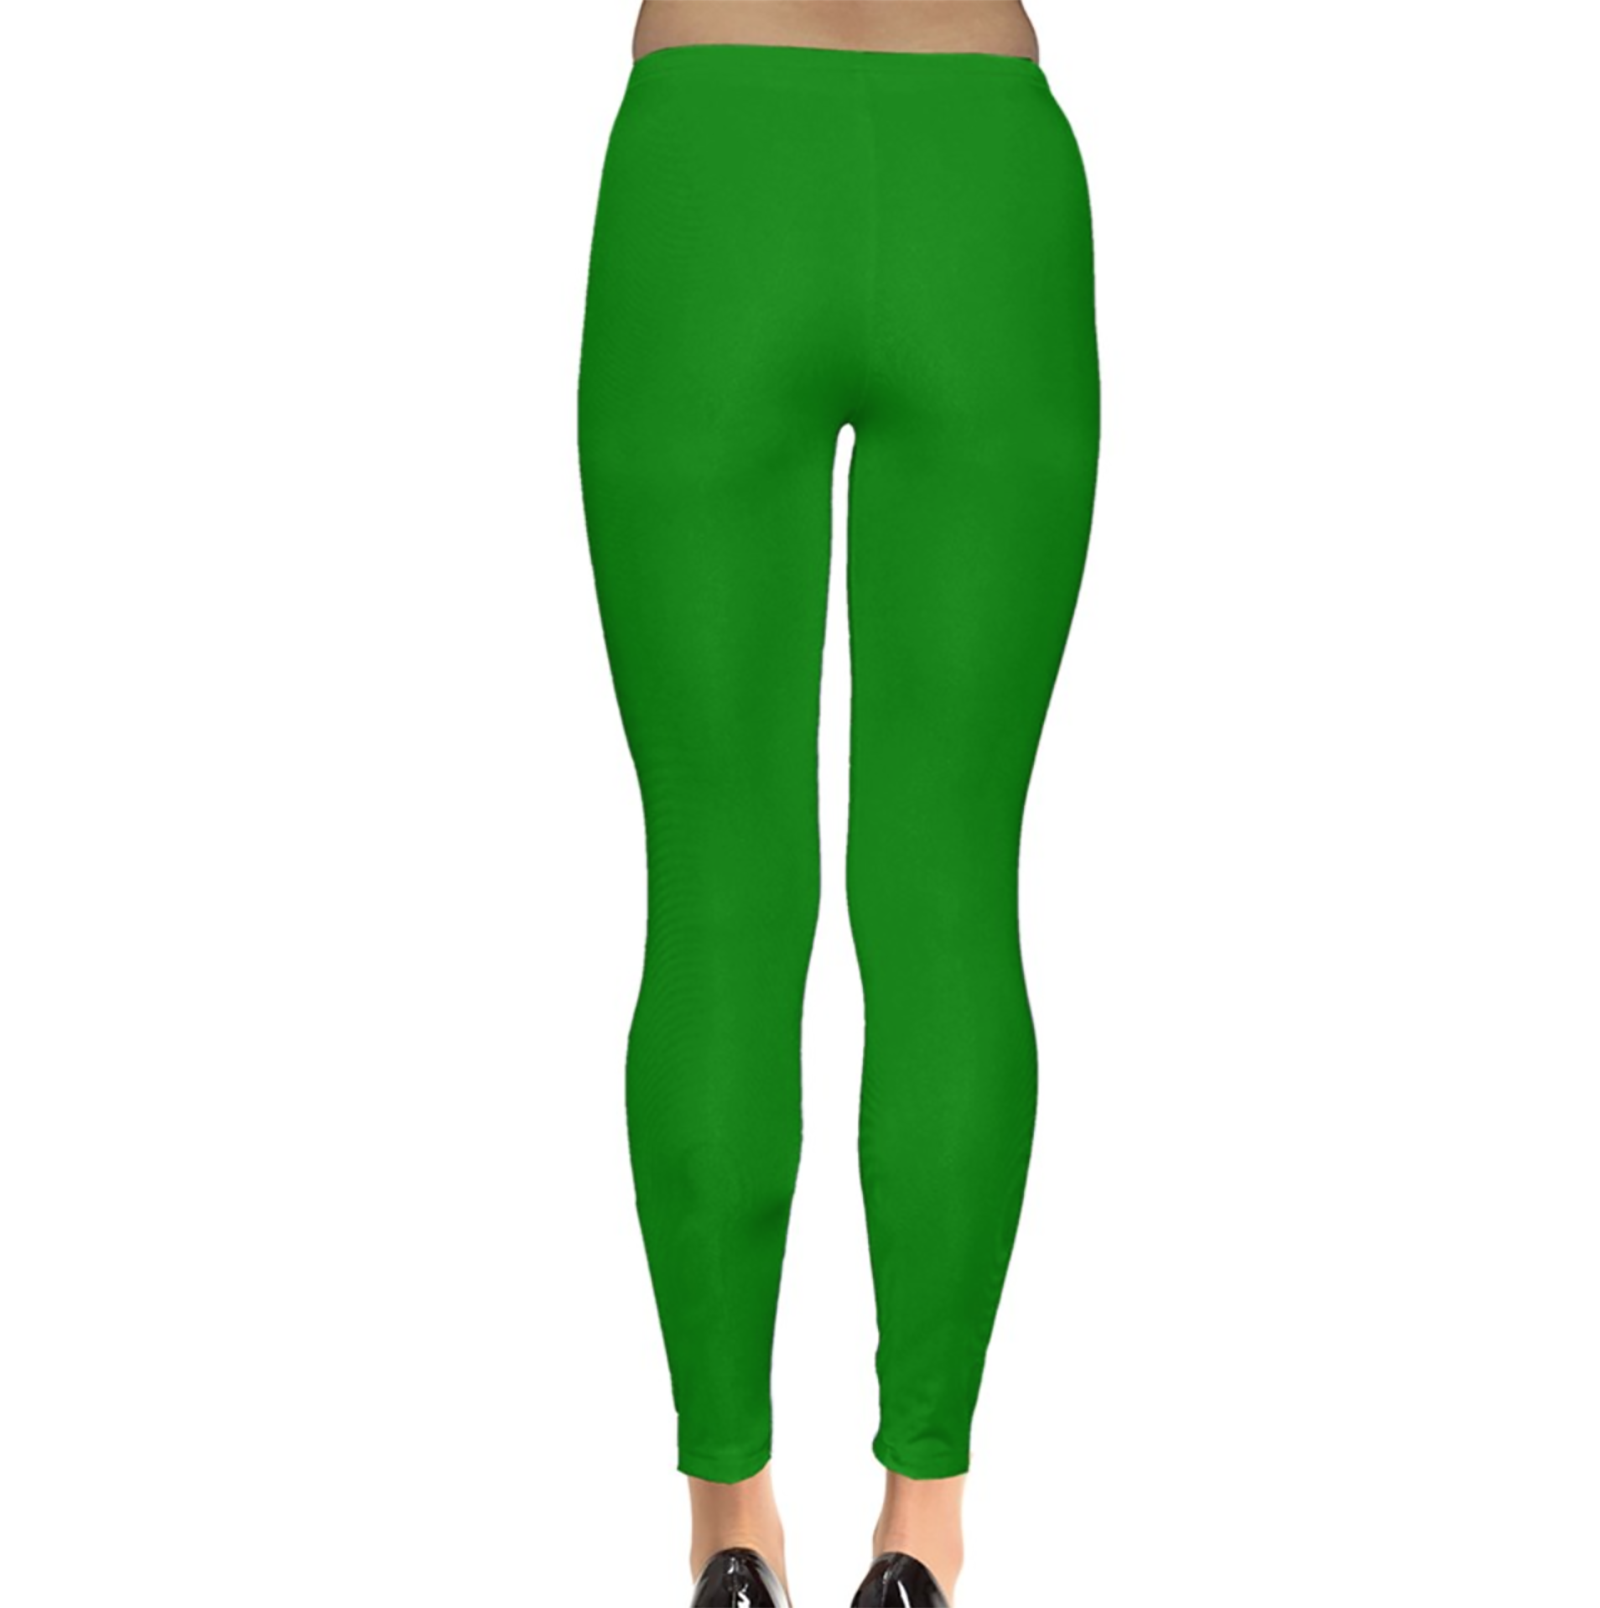 Candy Store Leggings (Green)